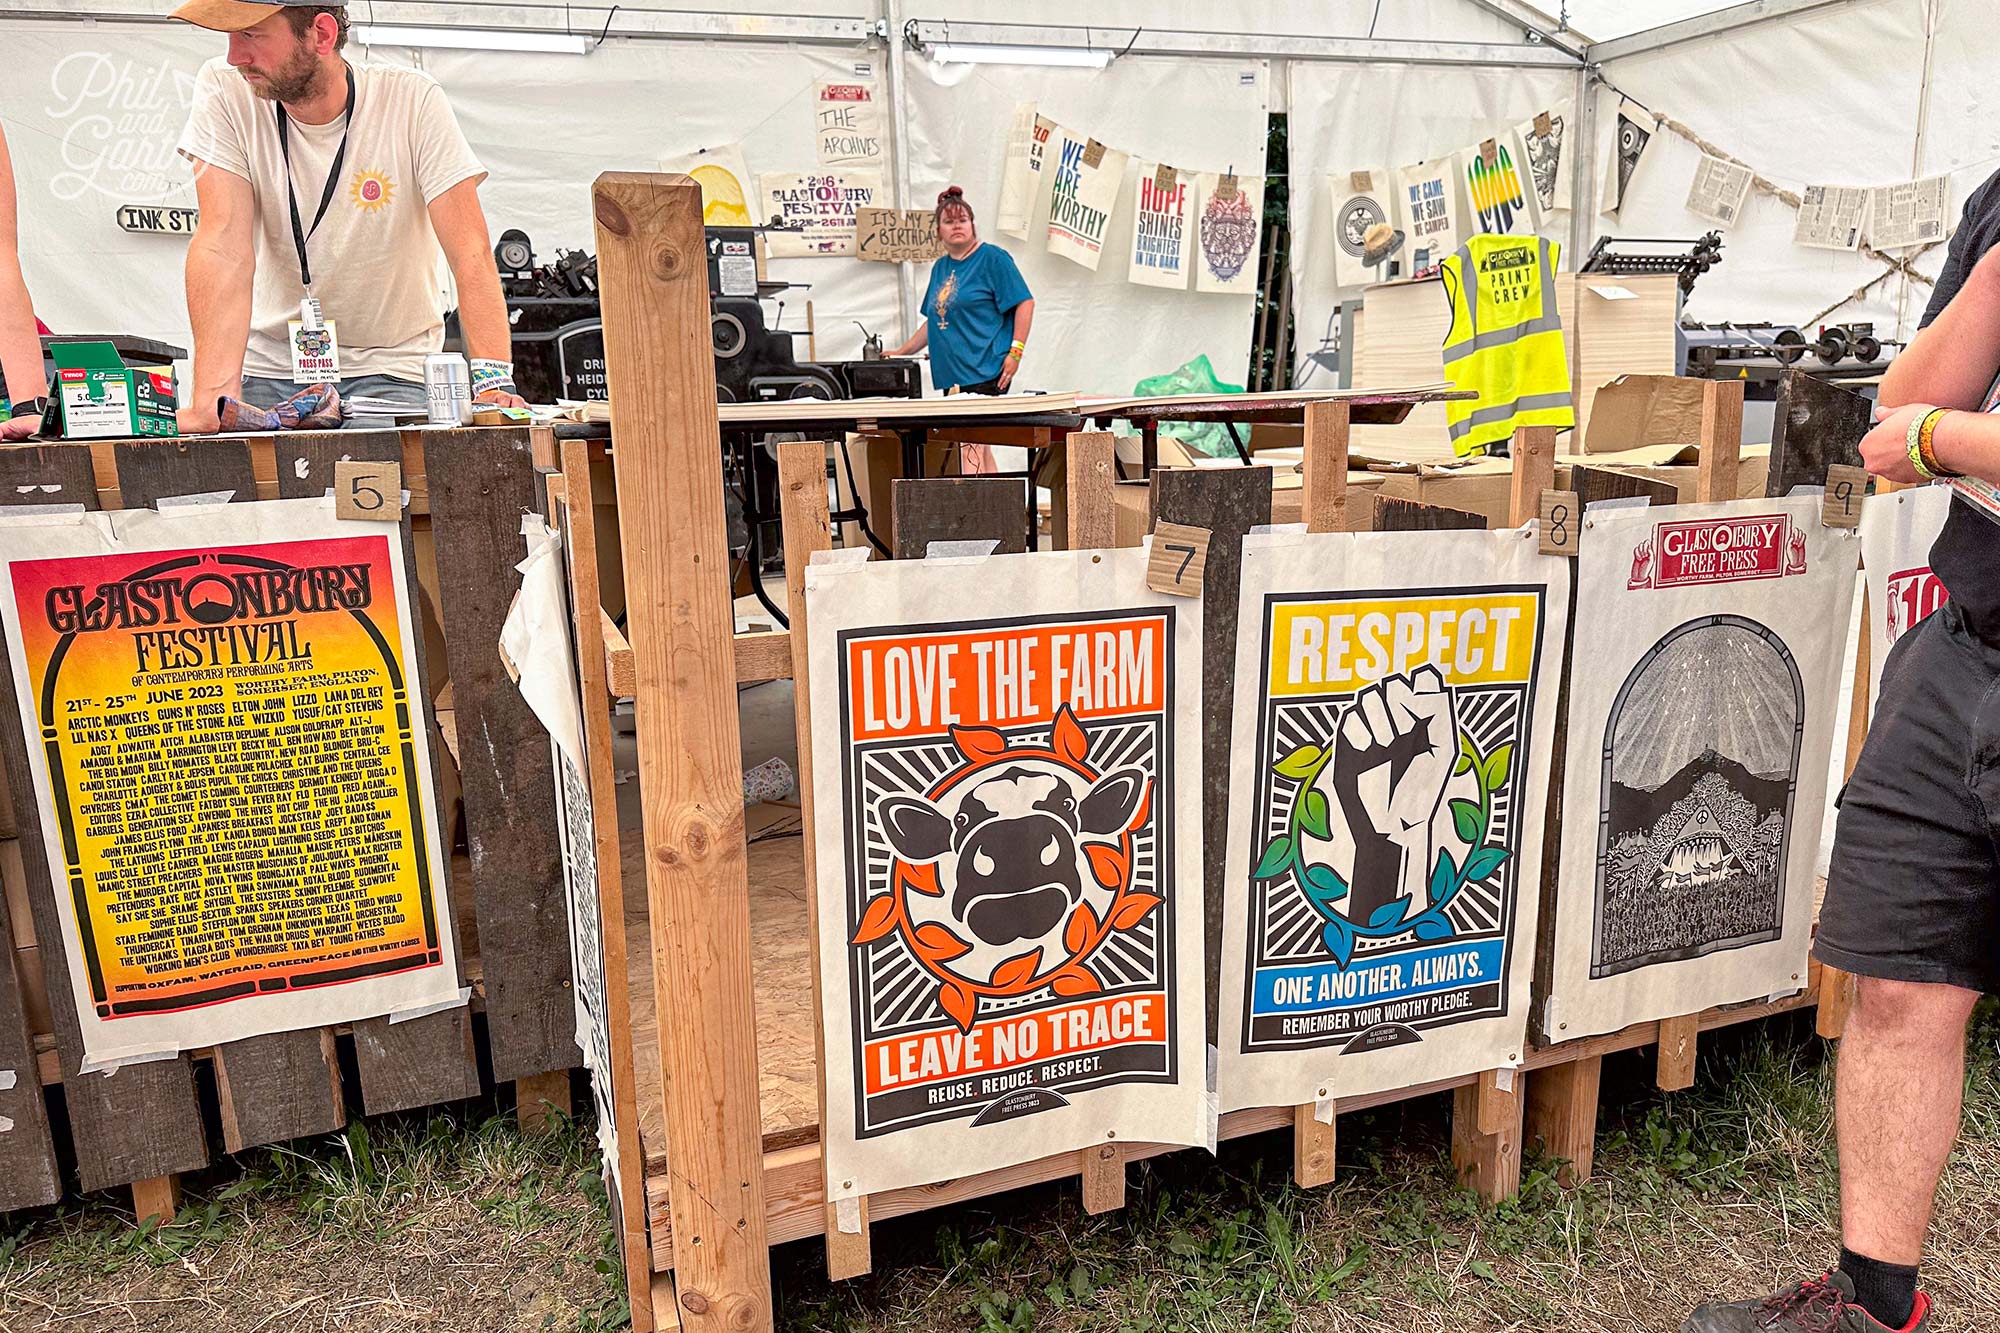 Traditionally printed Glastonbury posters - A unique souvenir you can take home